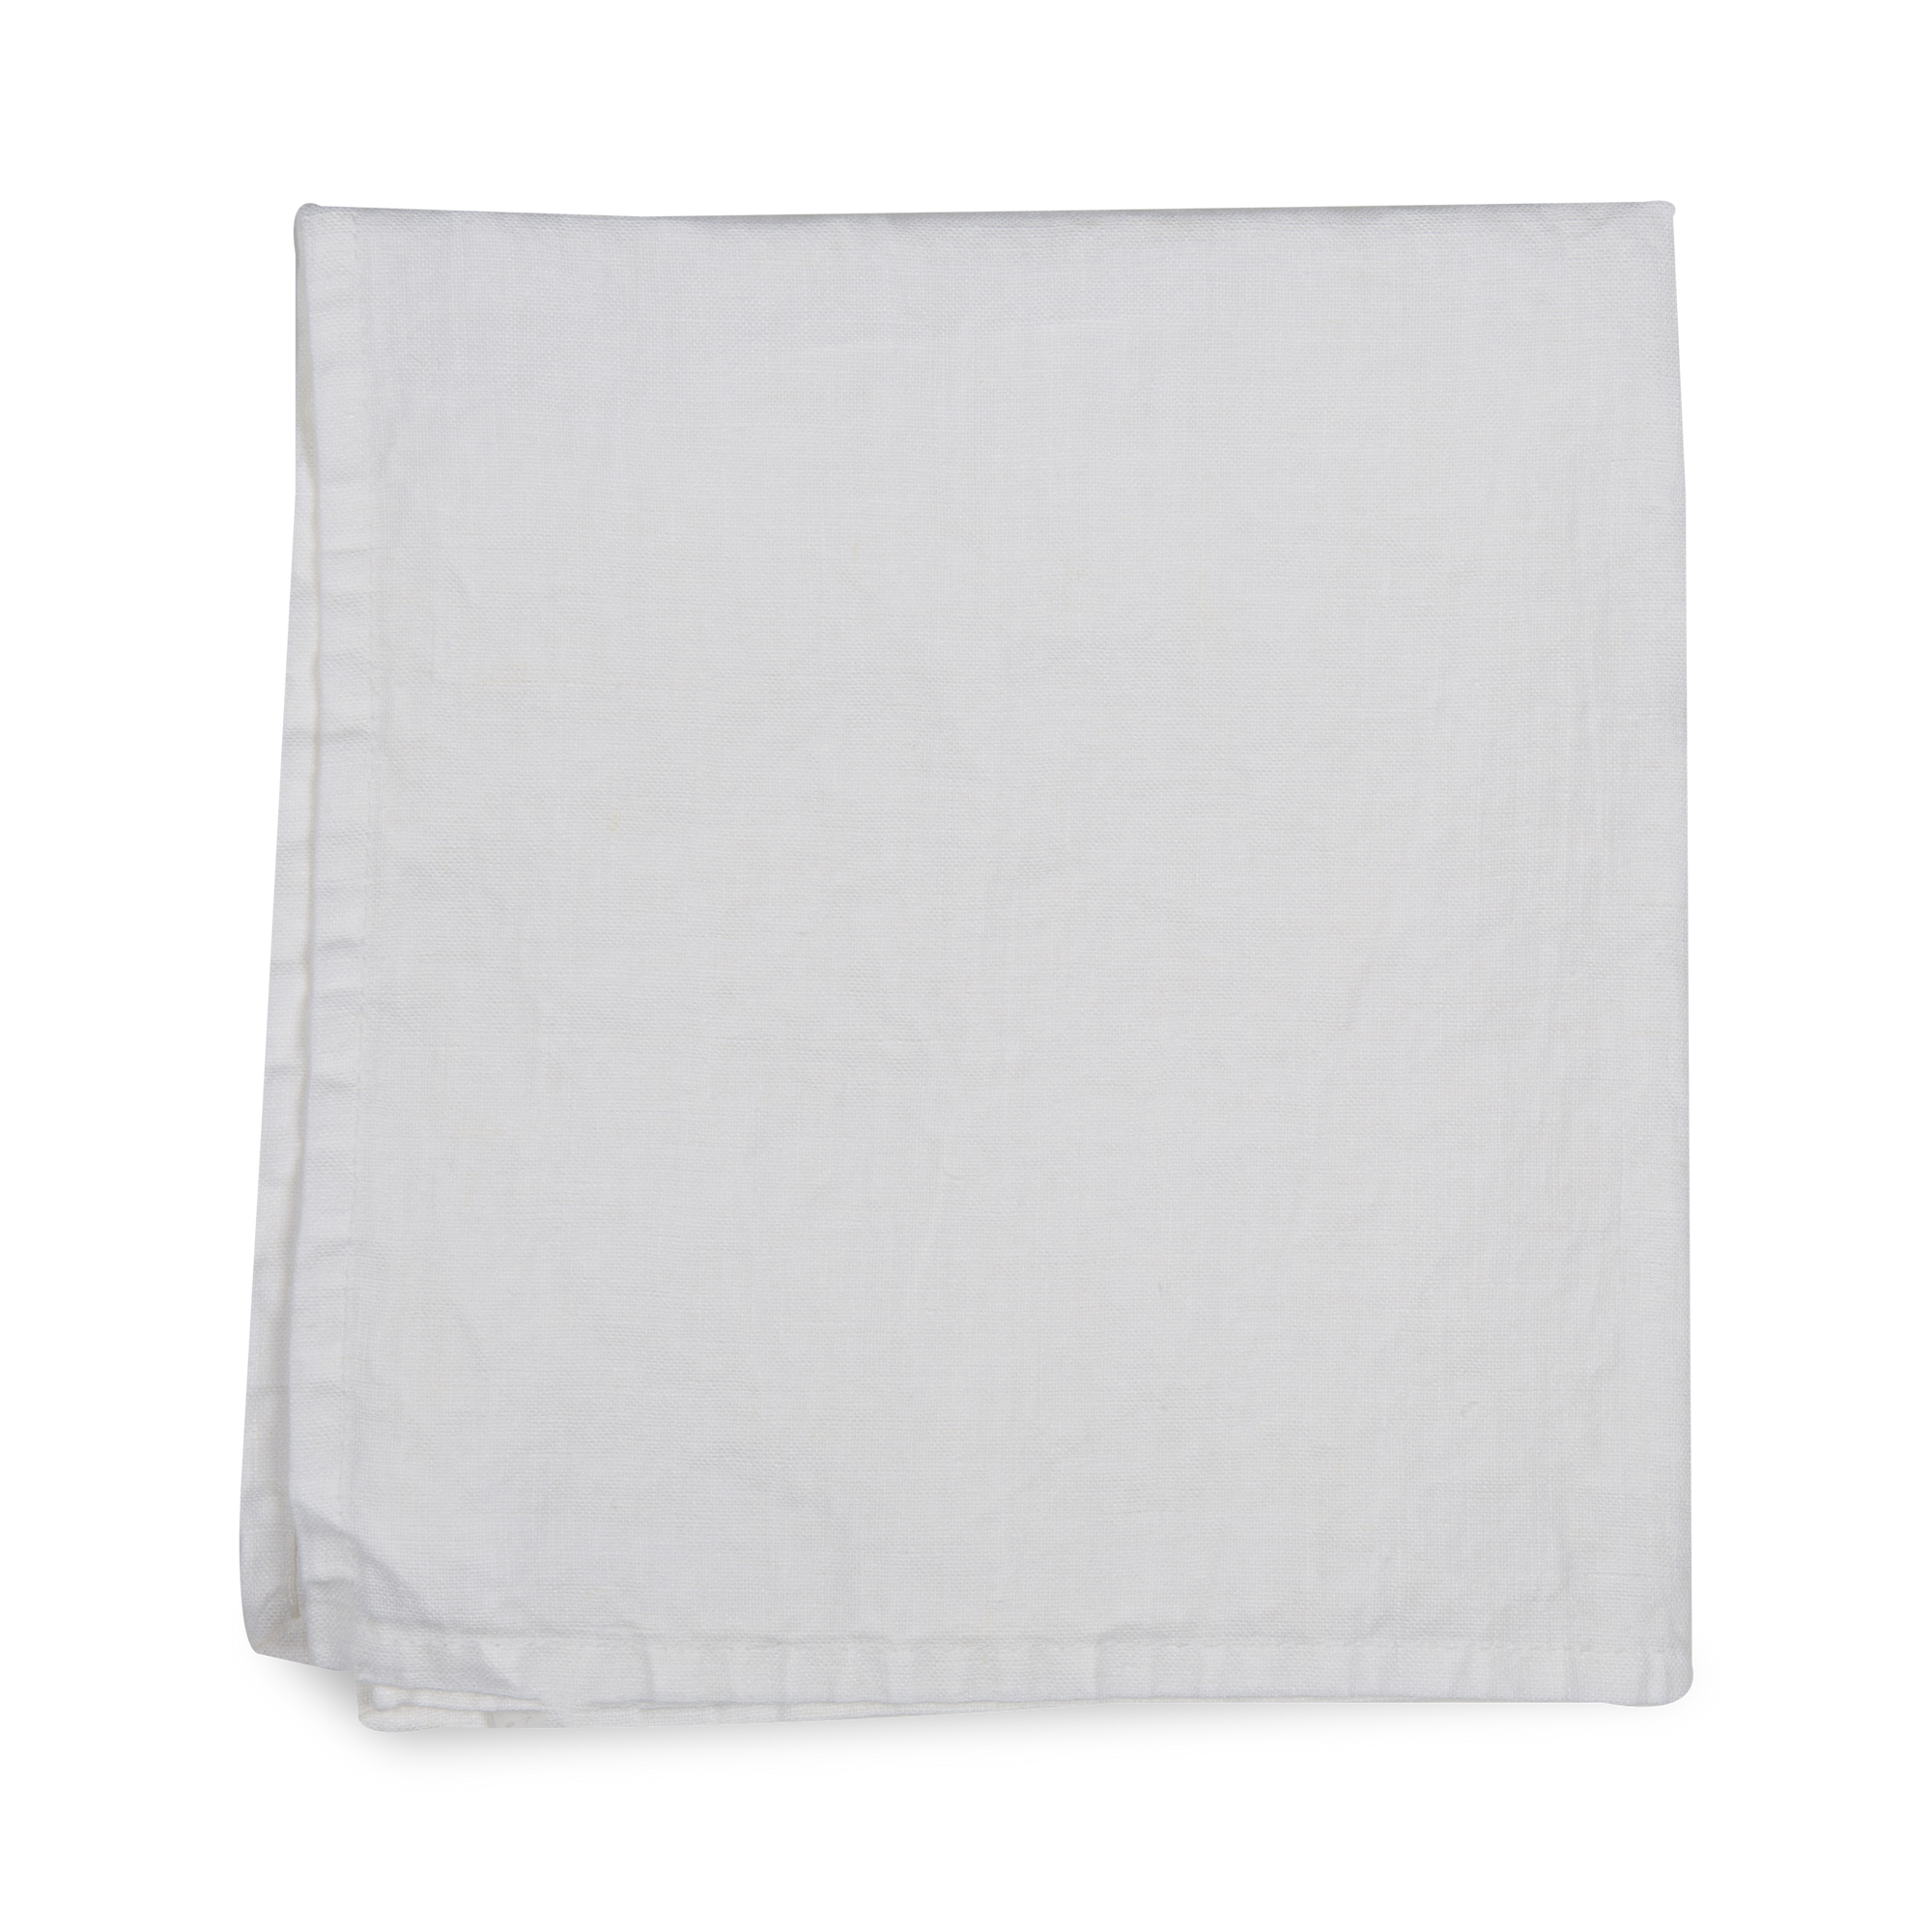 The Washed Linen Napkin feature relaxed linen that is stonewashed for softness and a casually crinkled finish.